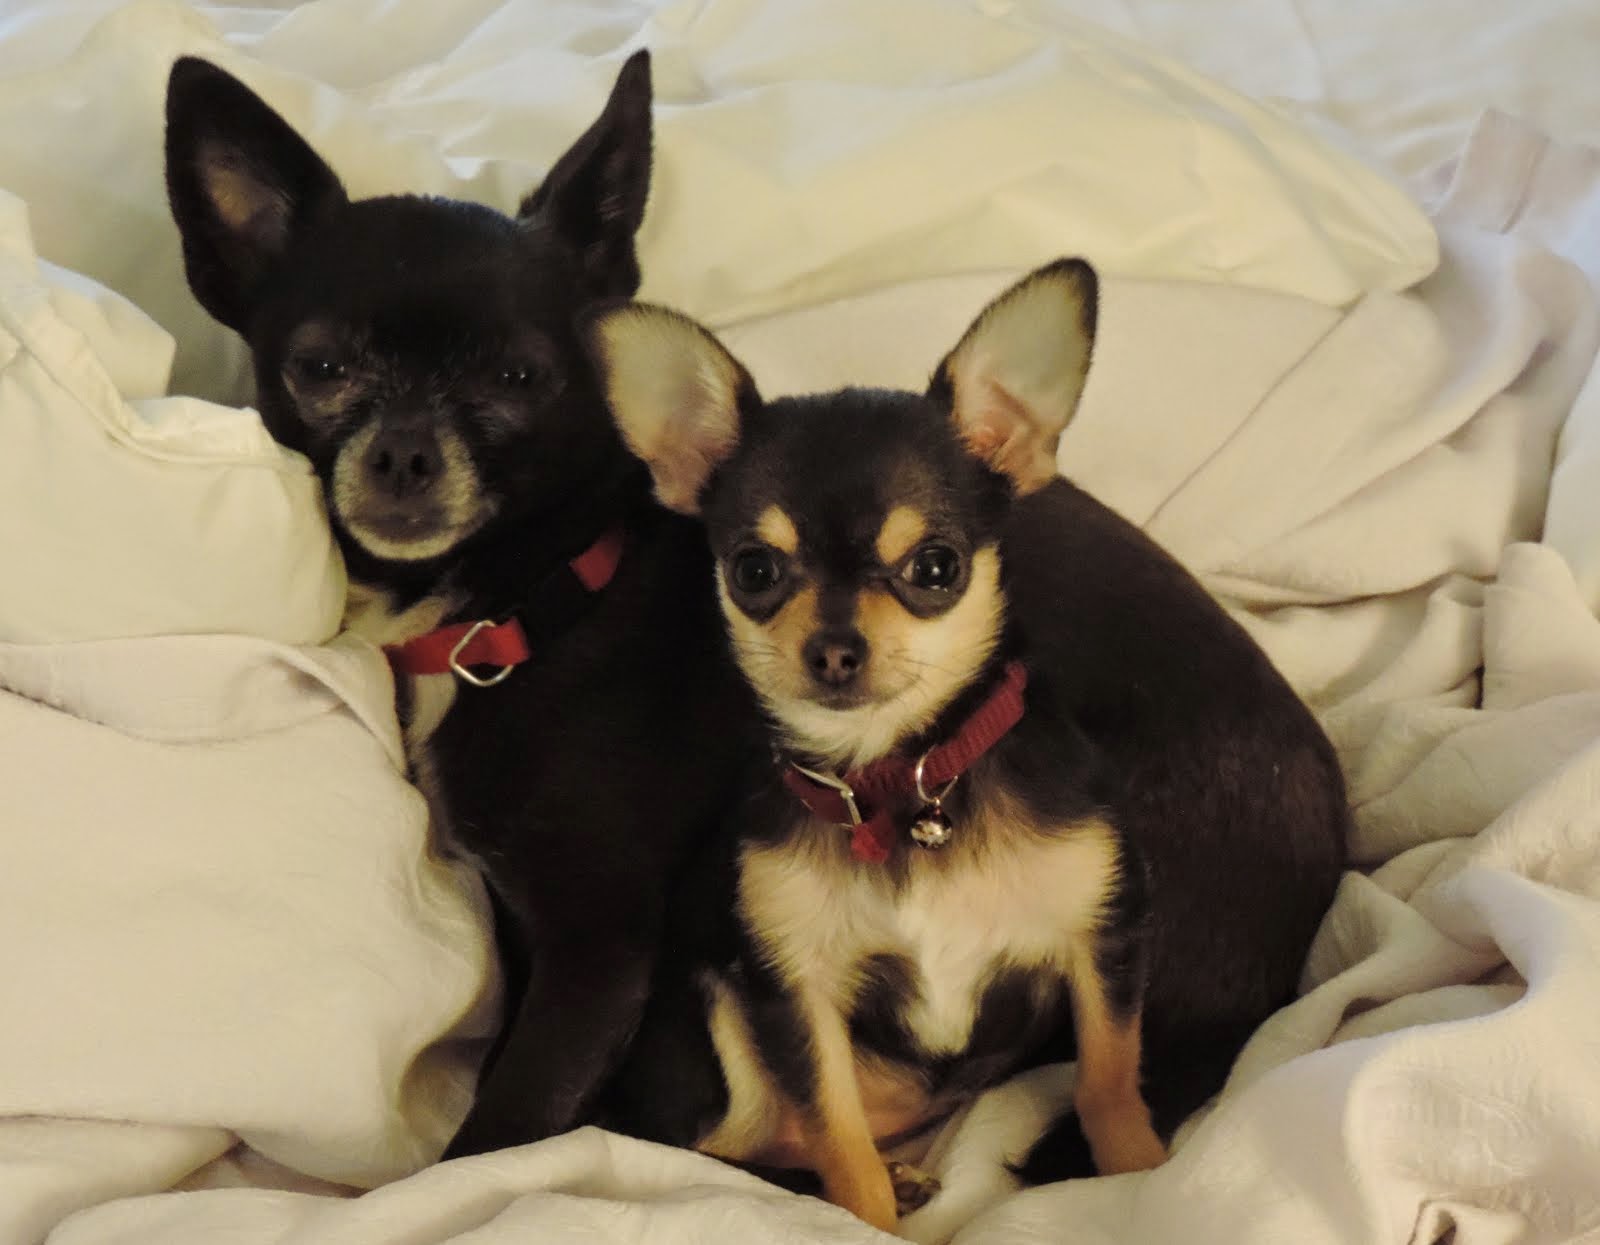 Our Chi's - Cheyenne and Jet